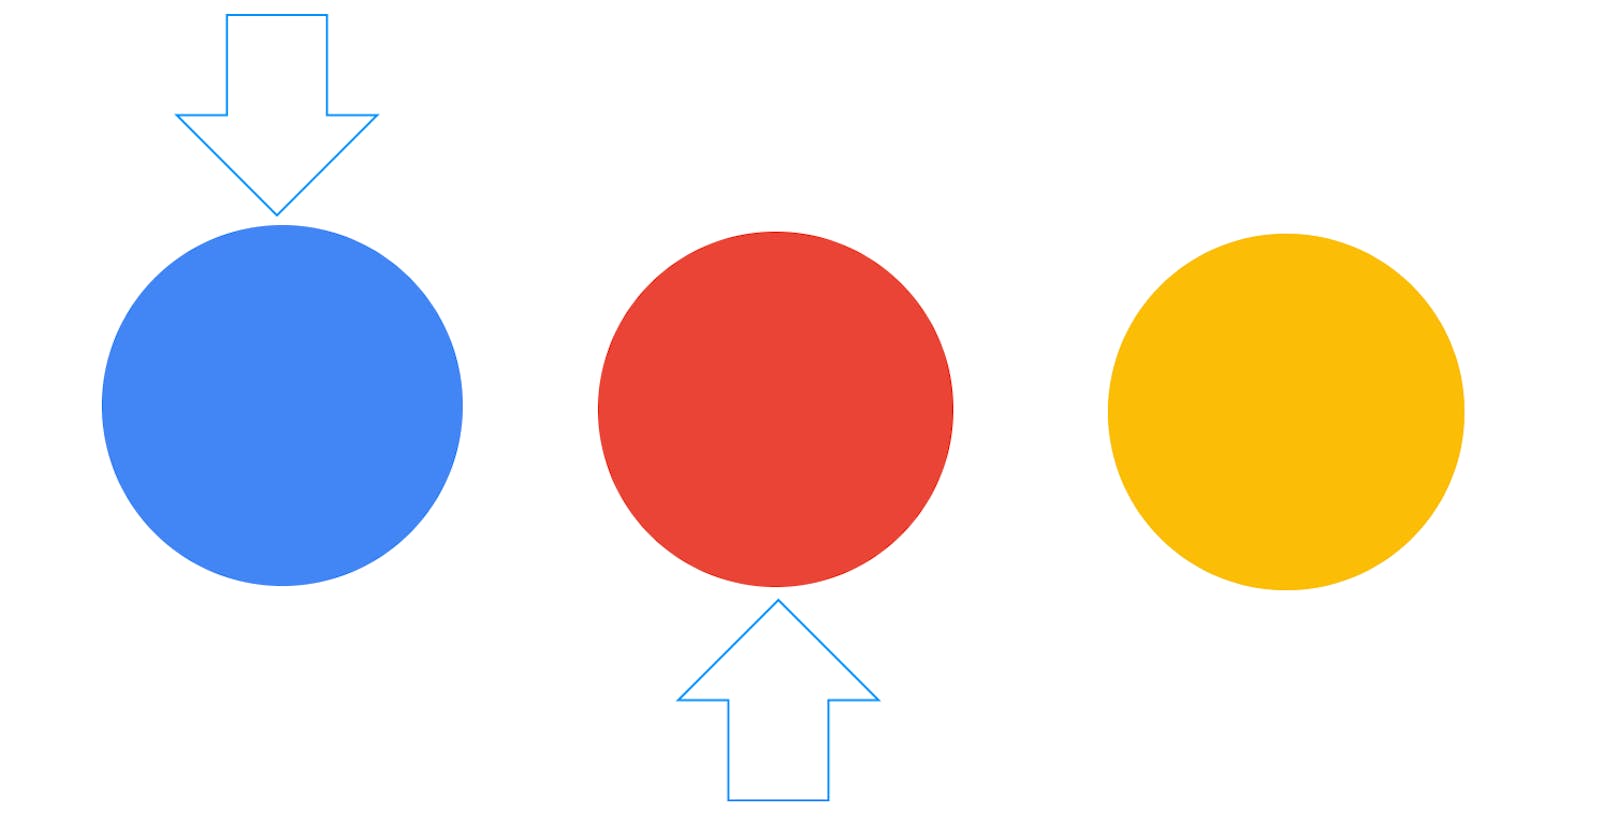 Recreate the Google Loading Animation using only CSS